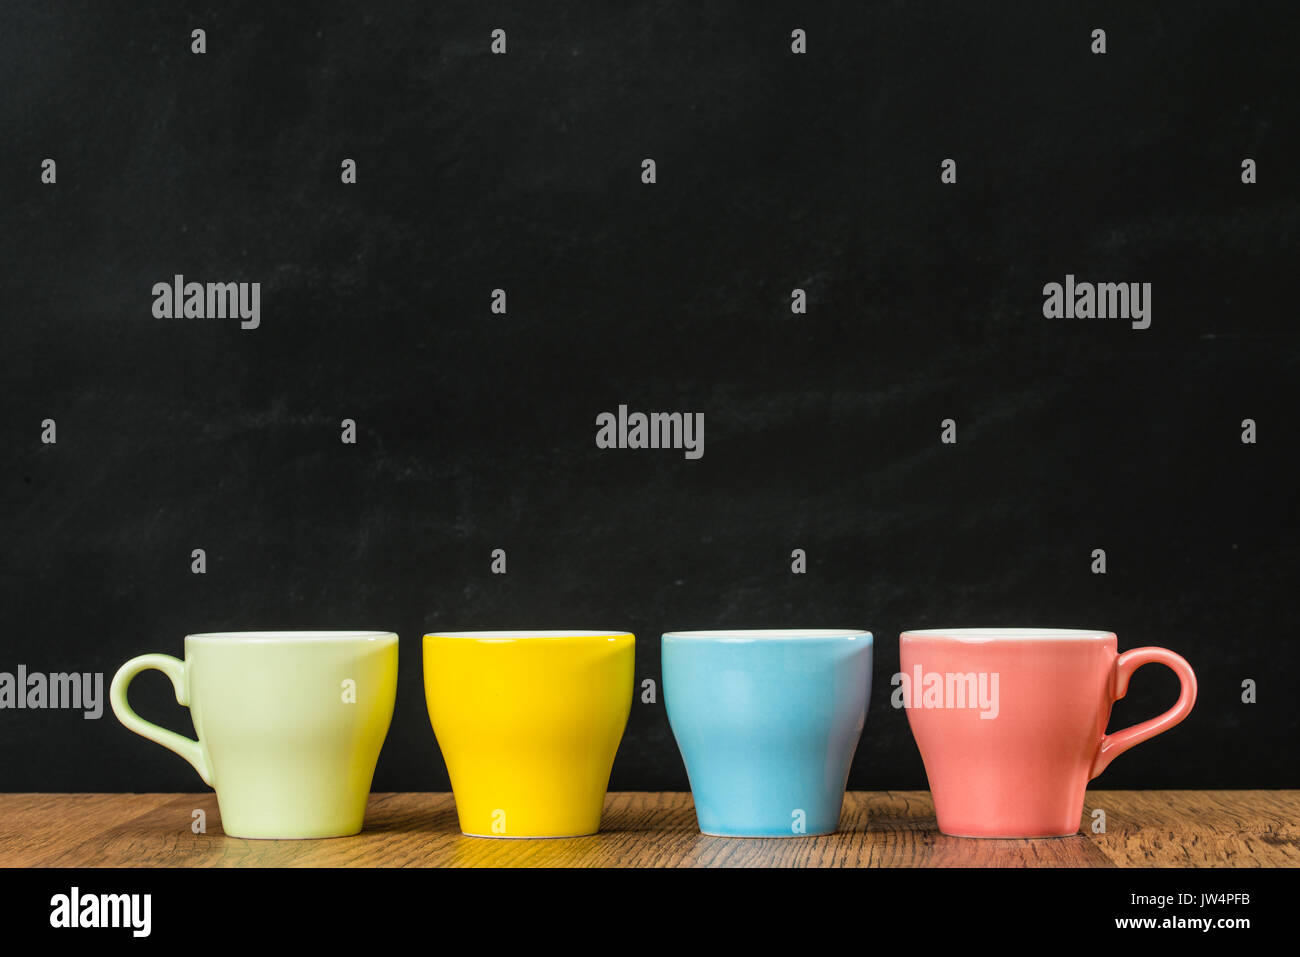 warm color coffee cups show the spring season style on wood texture floor table with chalk blackboard wall background with milky white yellow blue pin Stock Photo